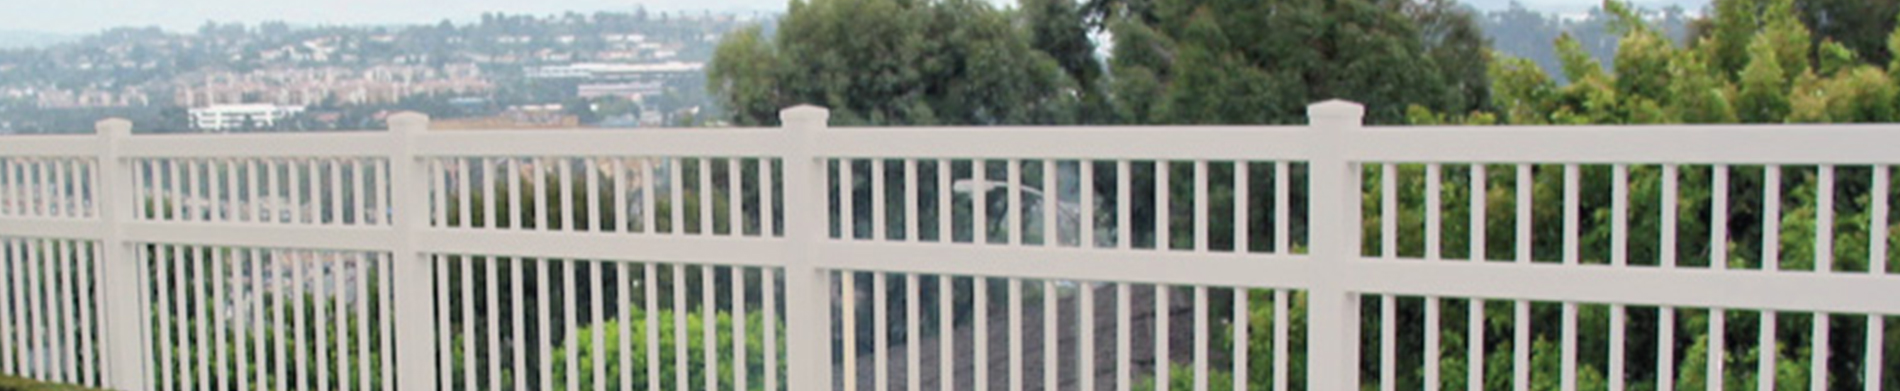 Choose Duramax Fences for Your Fencing Needs in The USA